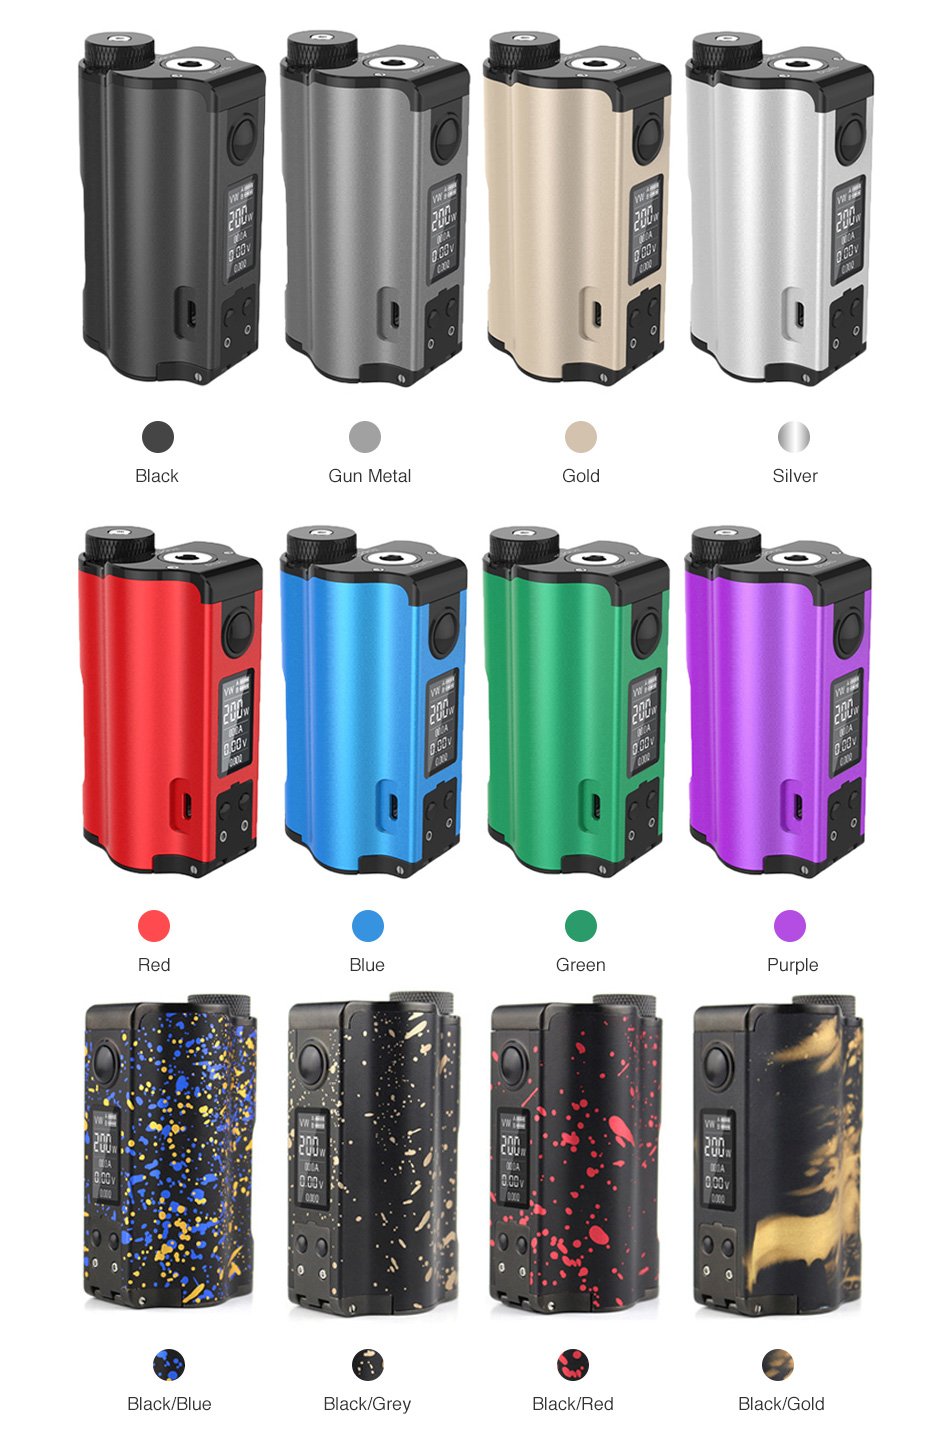 Twelve differently coloured Dovpo Topside Dual Squonk Mods